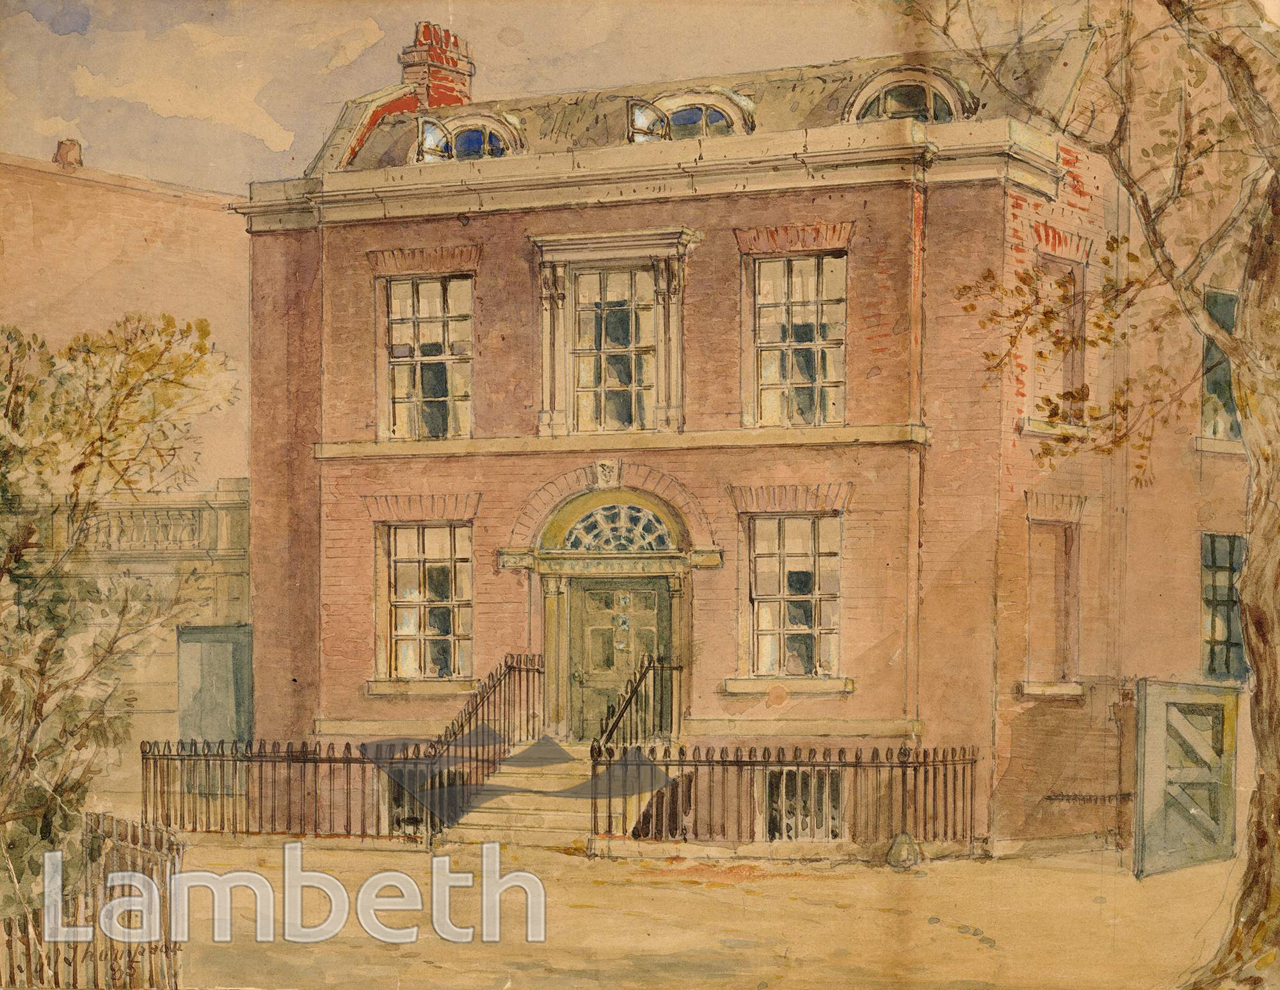 THE LAWN, SOUTH LAMBETH ROAD, VAUXHALL